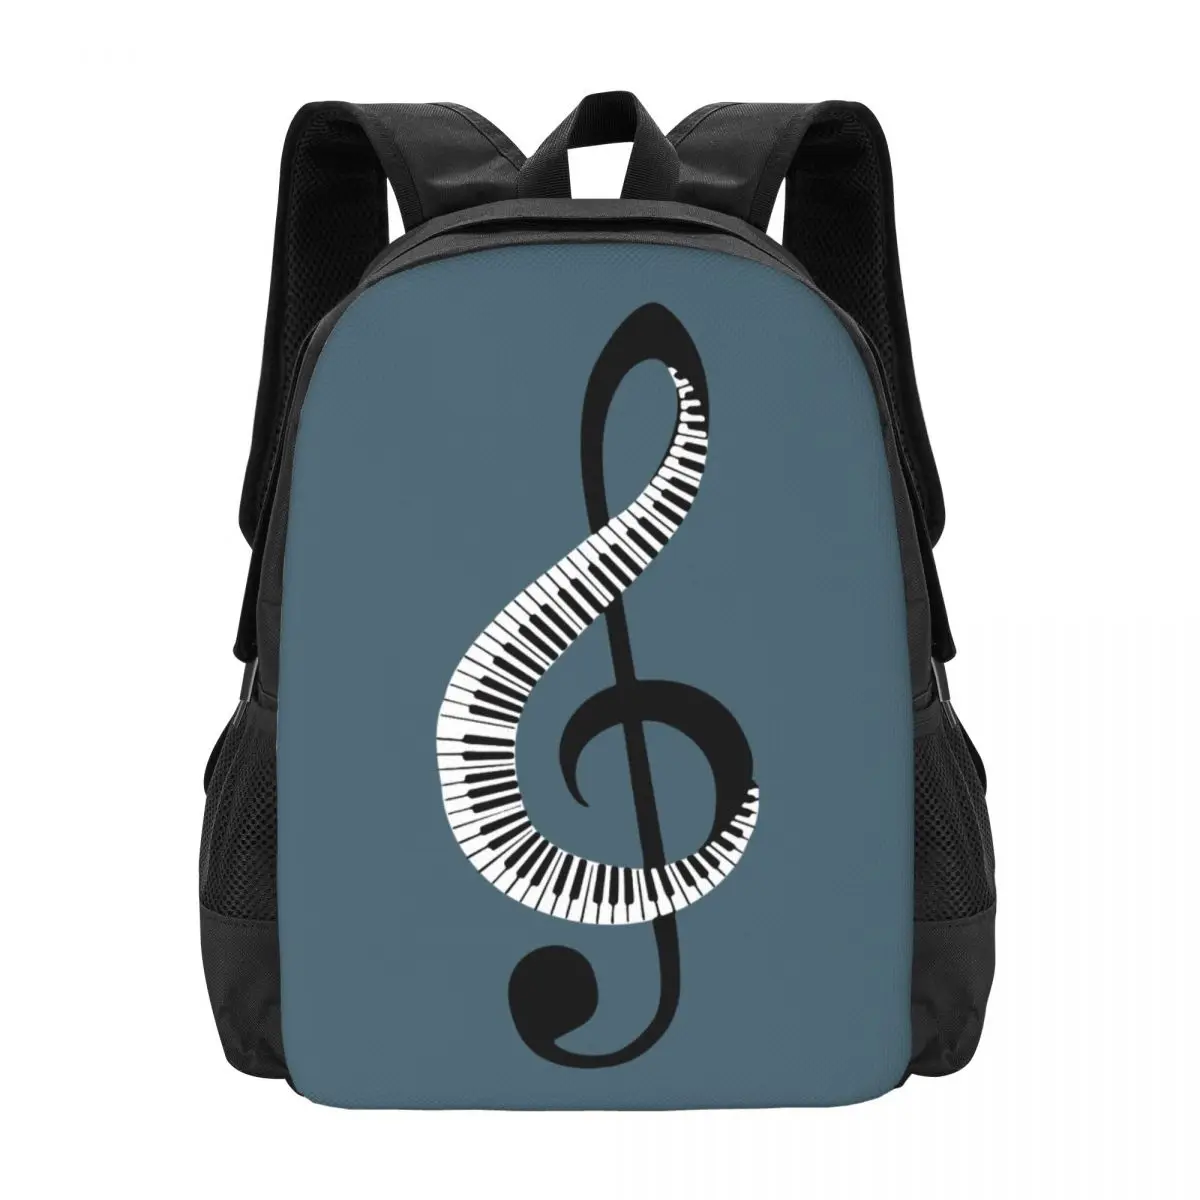 

Bling Music Note Piano Simple Stylish Student Schoolbag Waterproof Large Capacity Casual Backpack Travel Laptop Rucksack